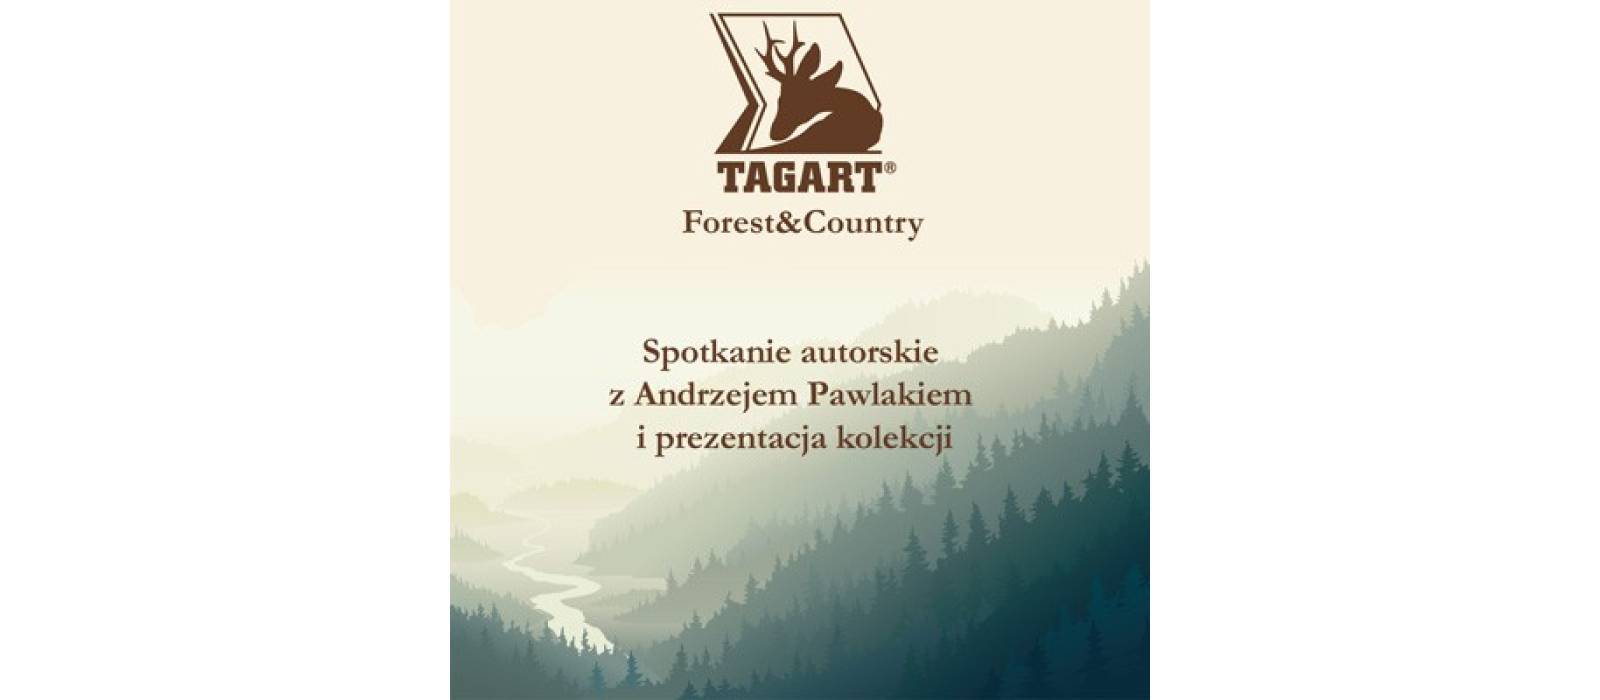 Otwarcie salonu Tagart Forest and Country - 1